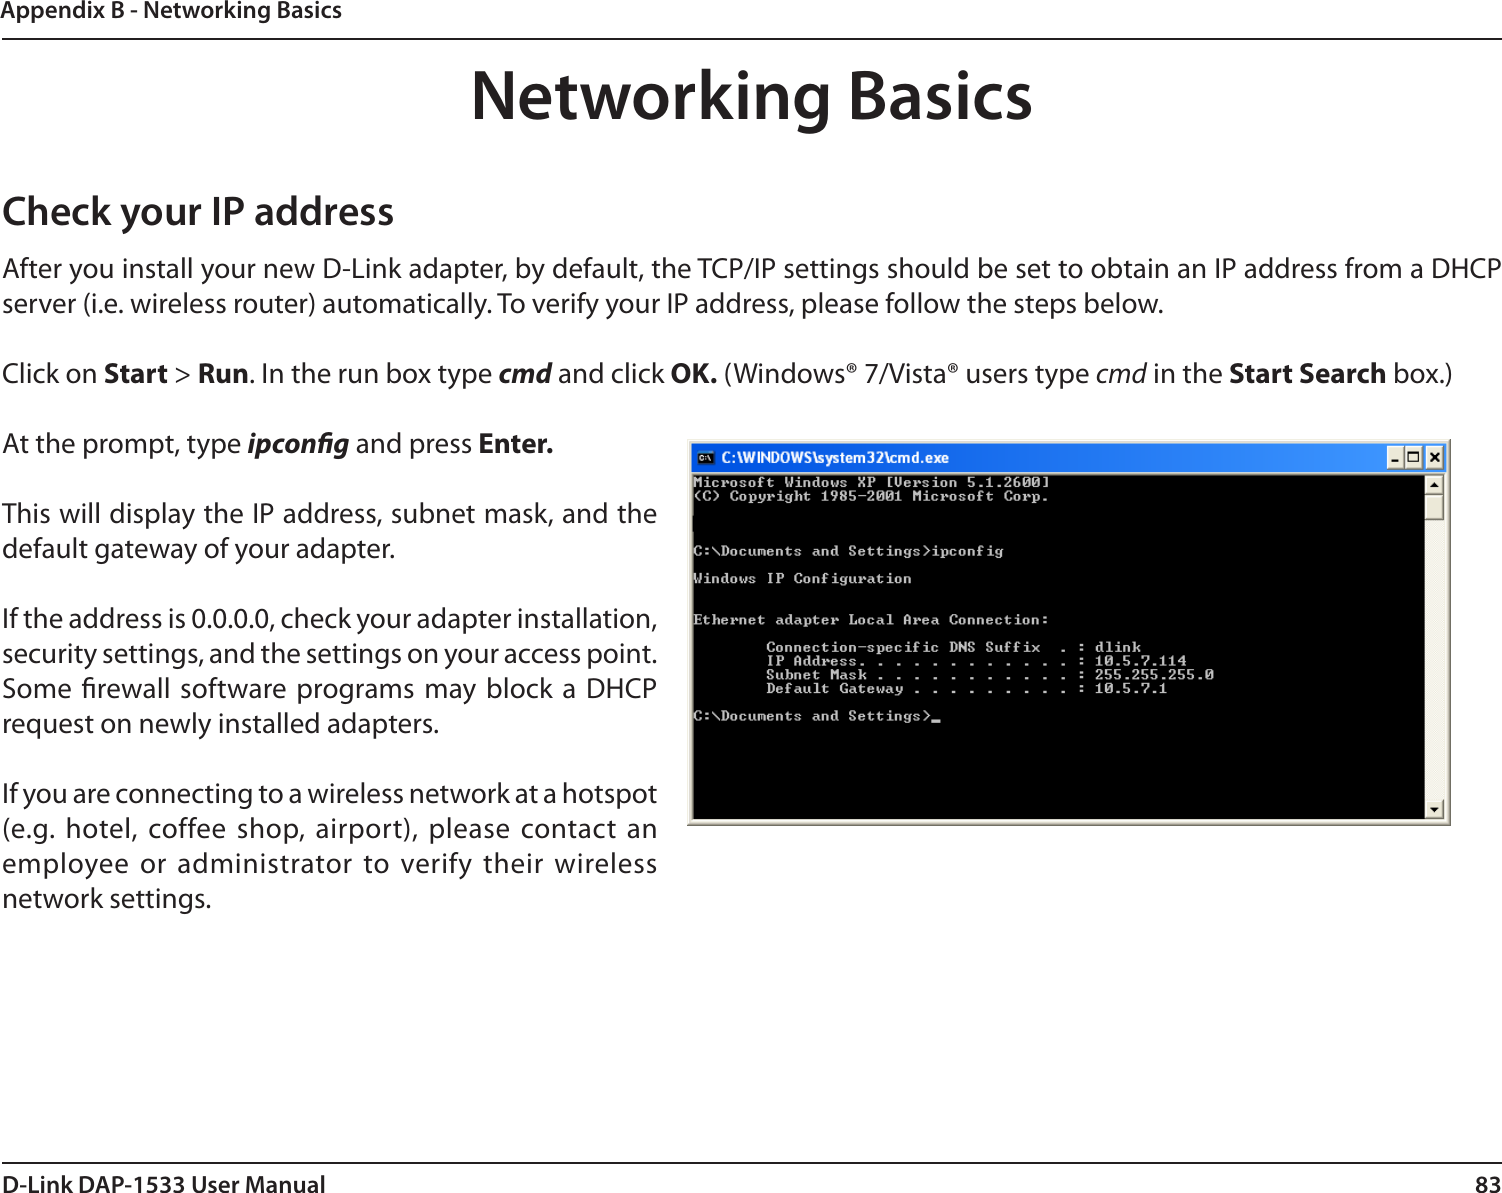 83D-Link DAP-1533 User ManualAppendix B - Networking BasicsNetworking BasicsCheck your IP addressAfter you install your new D-Link adapter, by default, the TCP/IP settings should be set to obtain an IP address from a DHCP server (i.e. wireless router) automatically. To verify your IP address, please follow the steps below.Click on Start &gt; Run. In the run box type cmd and click OK. (Windows® 7/Vista® users type cmd in the Start Search box.)At the prompt, type ipcong and press Enter.This will display the IP address, subnet mask, and the default gateway of your adapter.If the address is 0.0.0.0, check your adapter installation, security settings, and the settings on your access point. Some rewall software programs may block  a DHCP request on newly installed adapters. If you are connecting to a wireless network at a hotspot (e.g. hotel, coffee shop, airport),  please contact an employee or administrator to verify their wireless network settings.